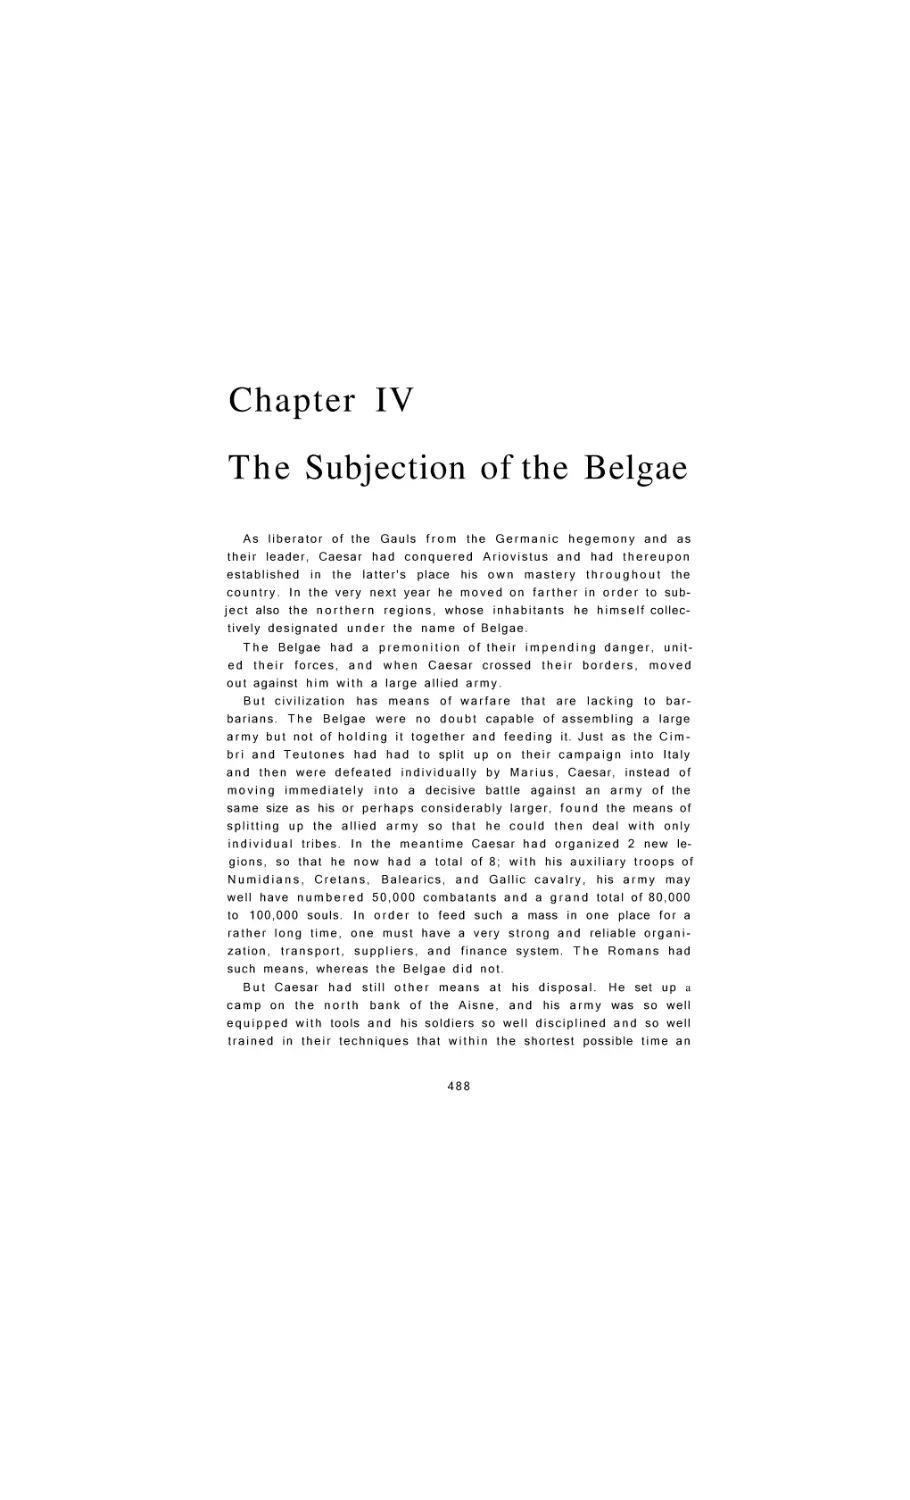 The Subjection of the Belgae